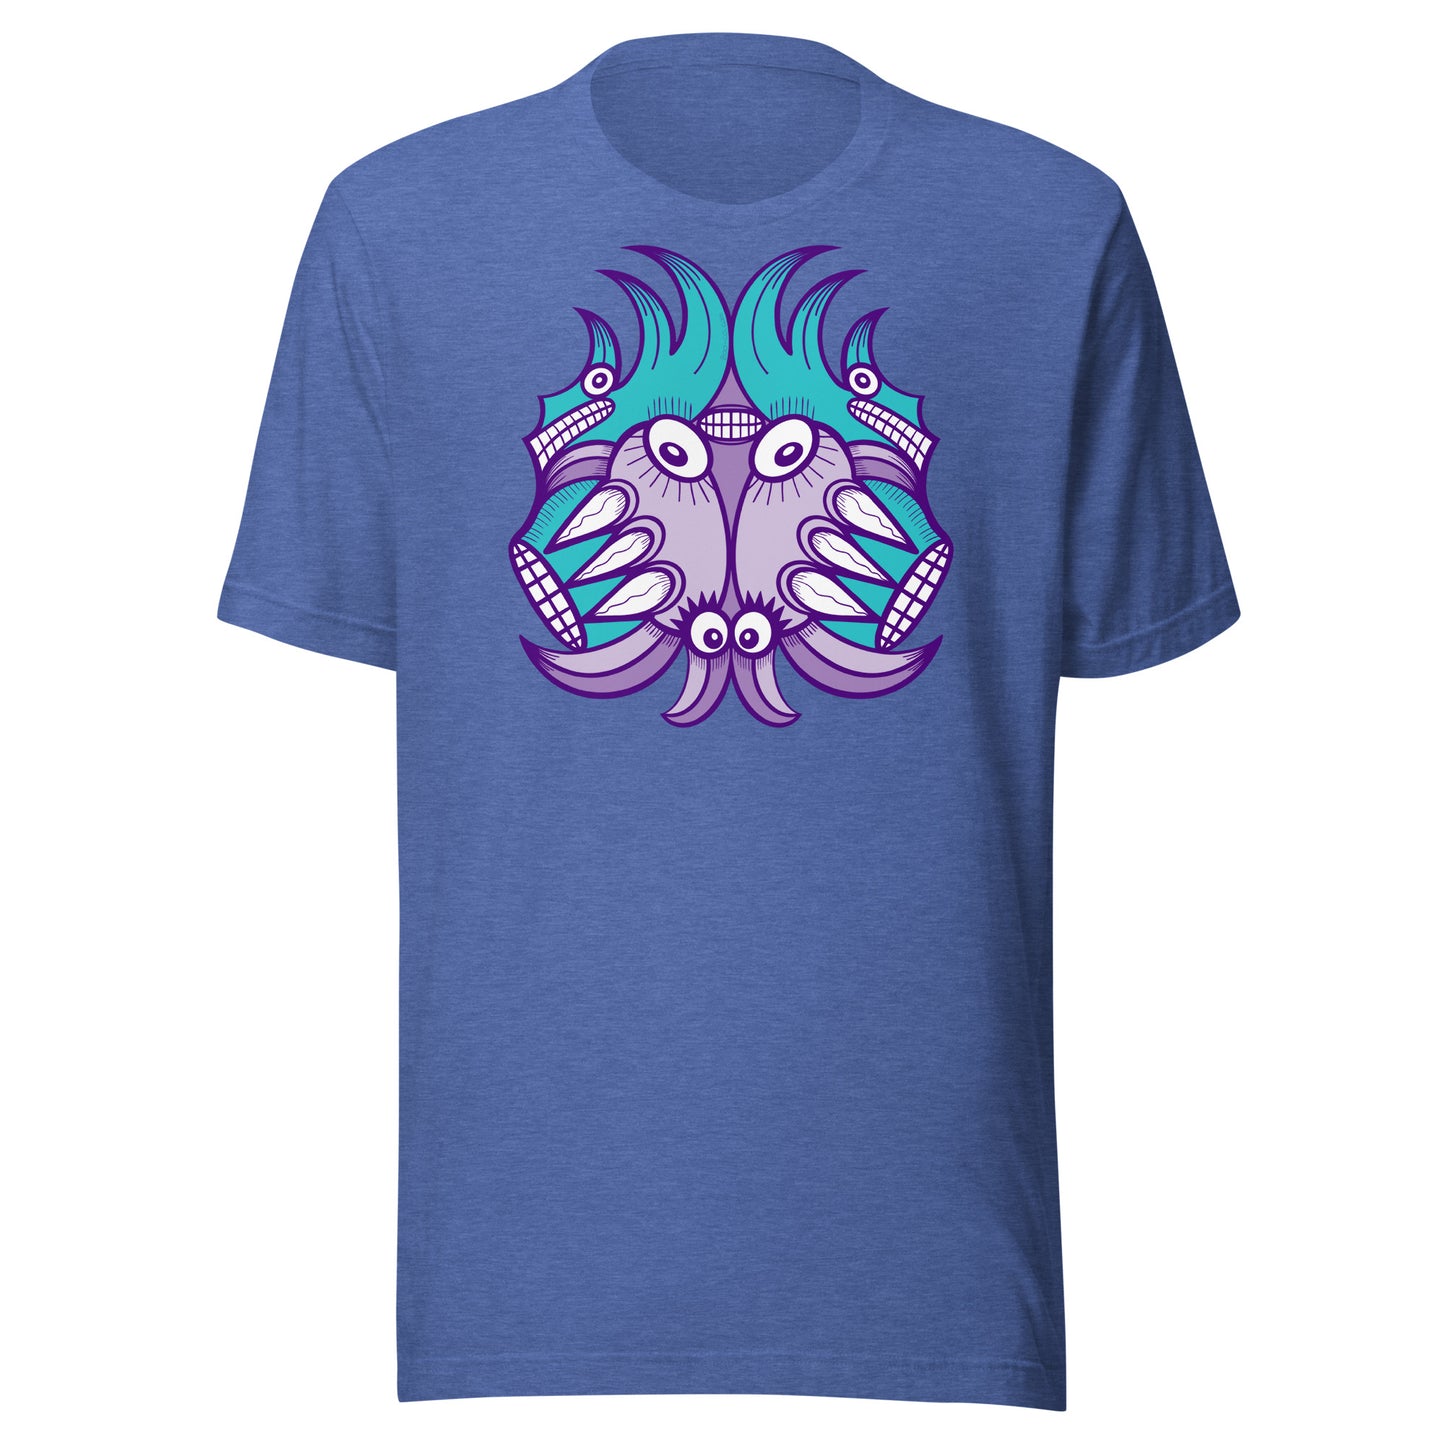 Planet 5: Aquatic Creatures from the Doodles of the Galaxy - Unisex t-shirt. Heather true royal color. Front view